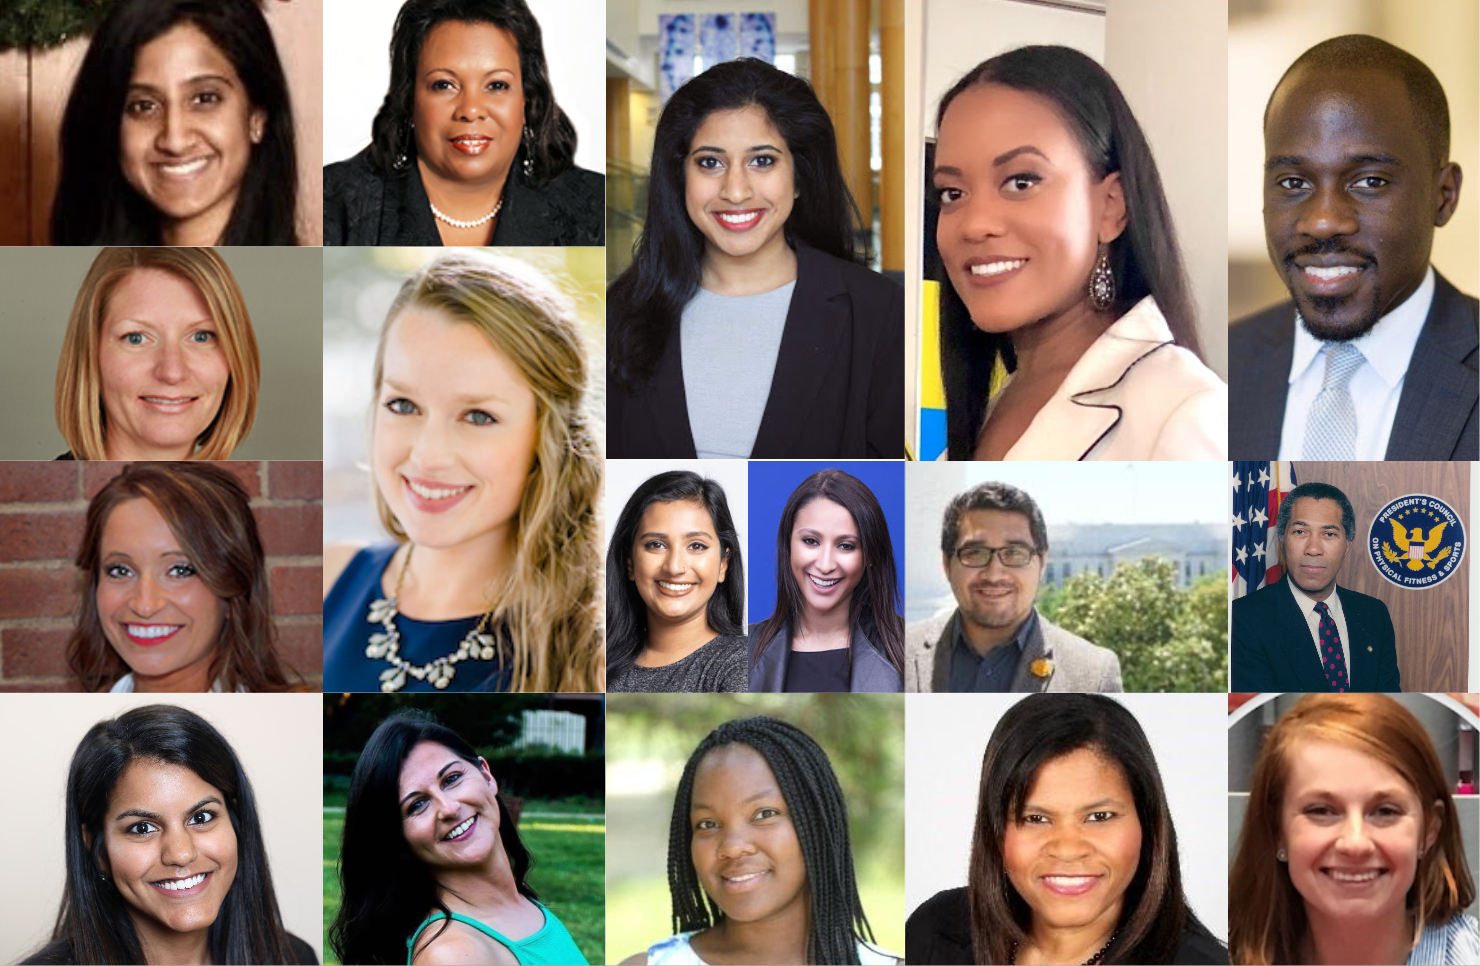 SPH An Board 2020-2021 of School of Public Health at the University of Maryland 